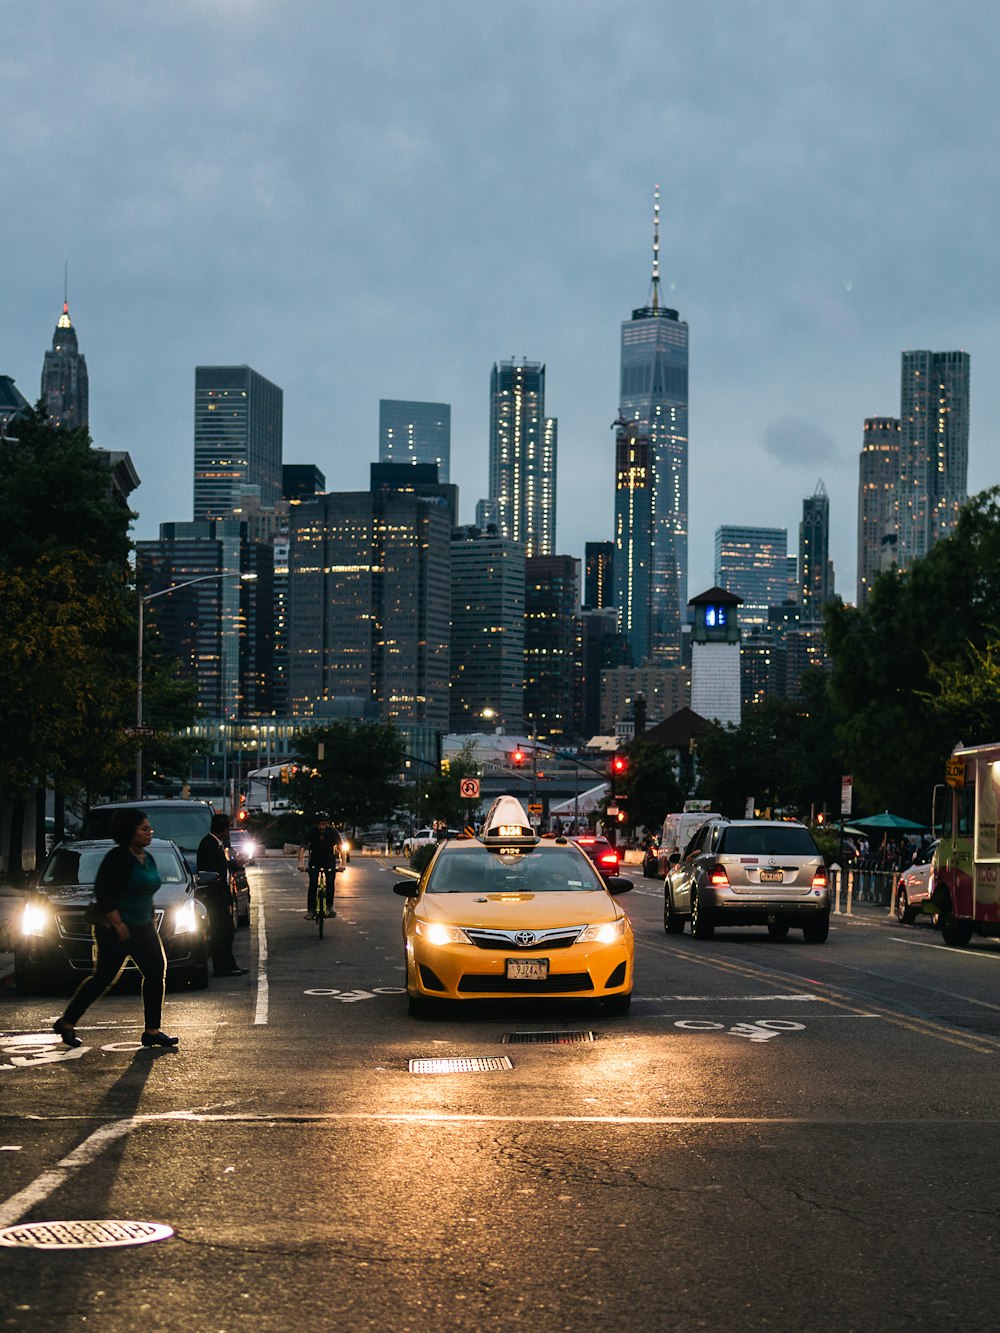 a yellow taxi cab driving down a street next to tall buildings